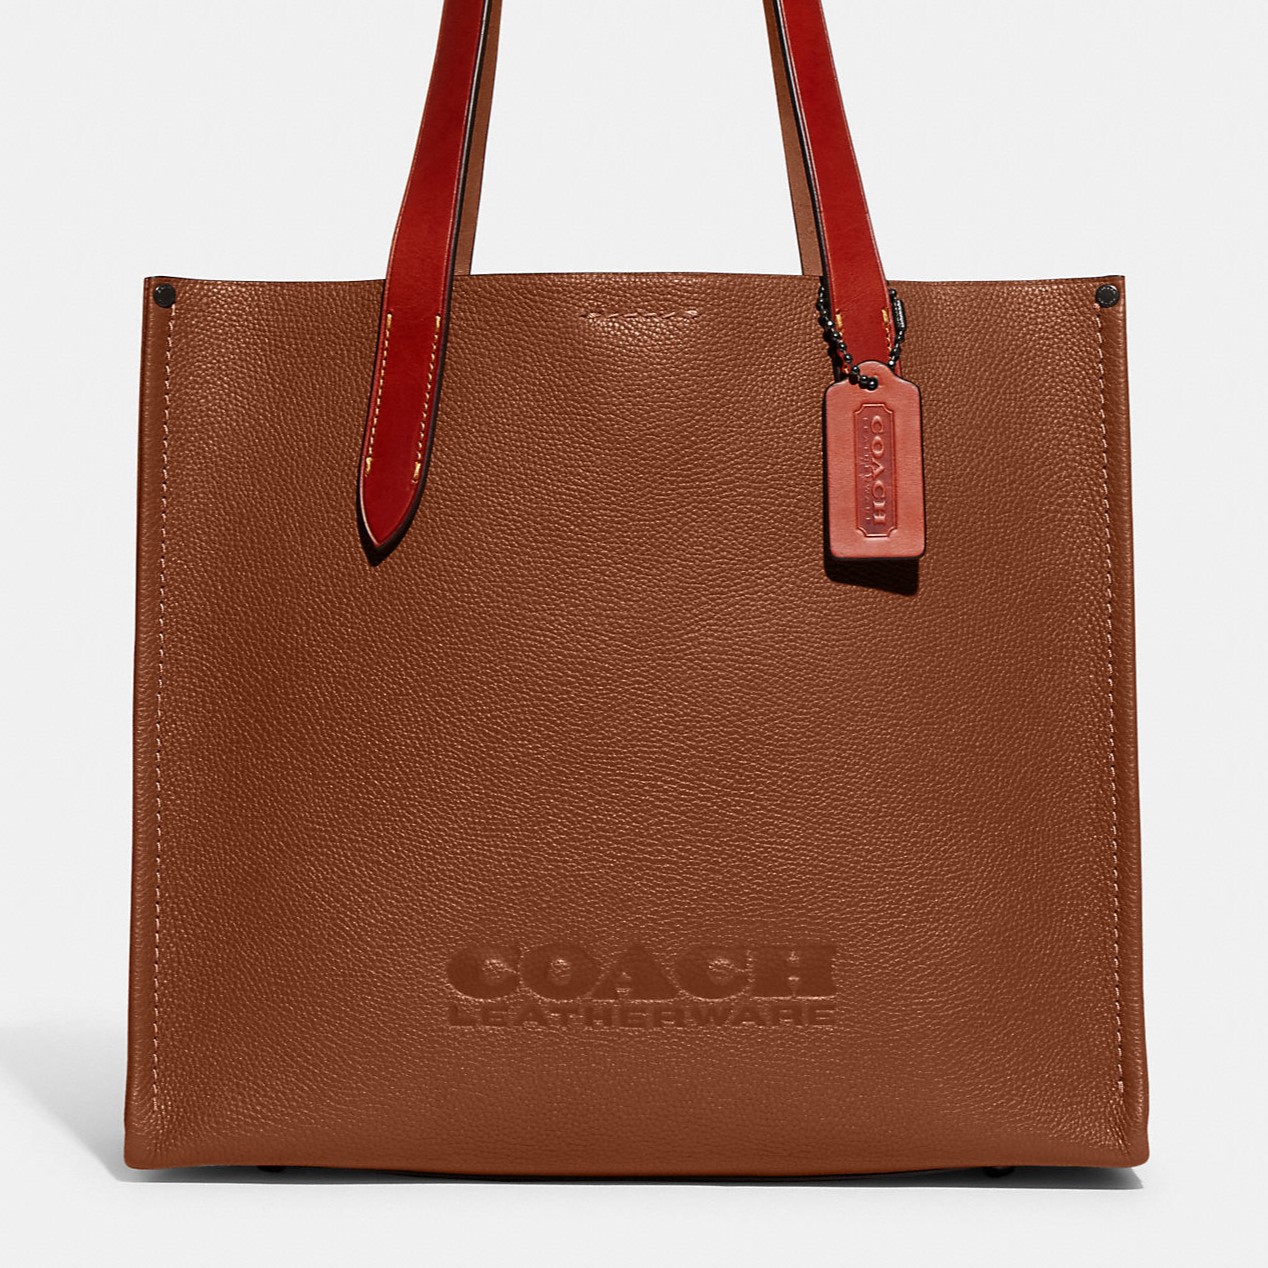 TÚI NỮ TOTE COACH RELAY TOTE 34 POLISHED PEBBLE LEATHER BAG CH757 8